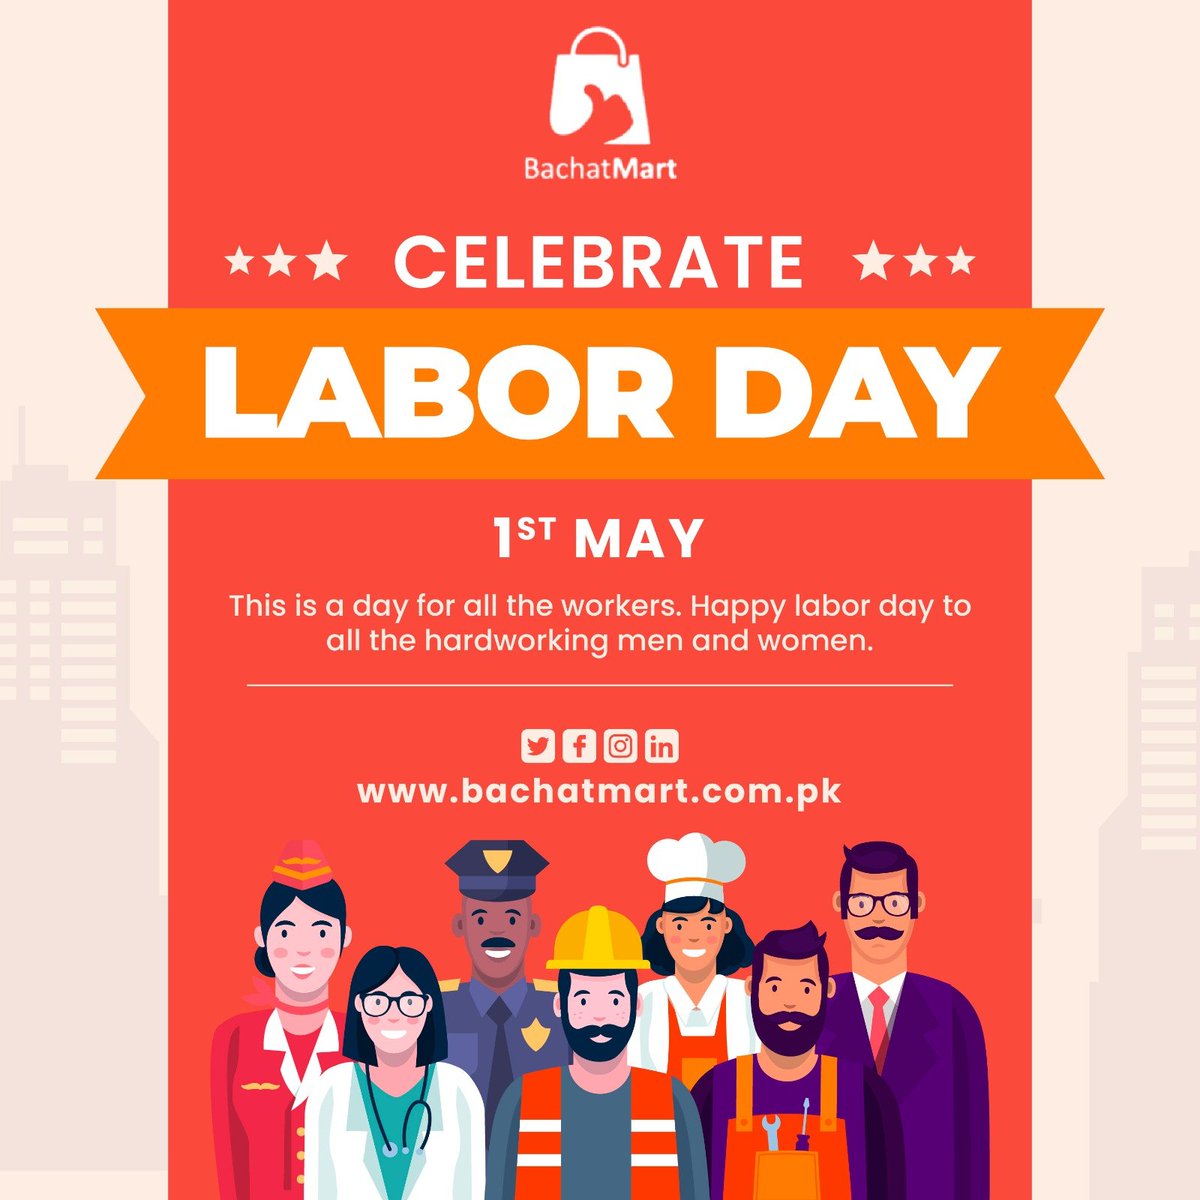 Bachat Mart wishing u all a very Happy Labor Day

Working hard often means sacrificing your time and energy, but the rewards are always worth it in the end.

#laborday #laborday2023 #mayday #may2023 #bachatmart #onlinemart #onlinestore #shoponline #energy #celebrate #demol